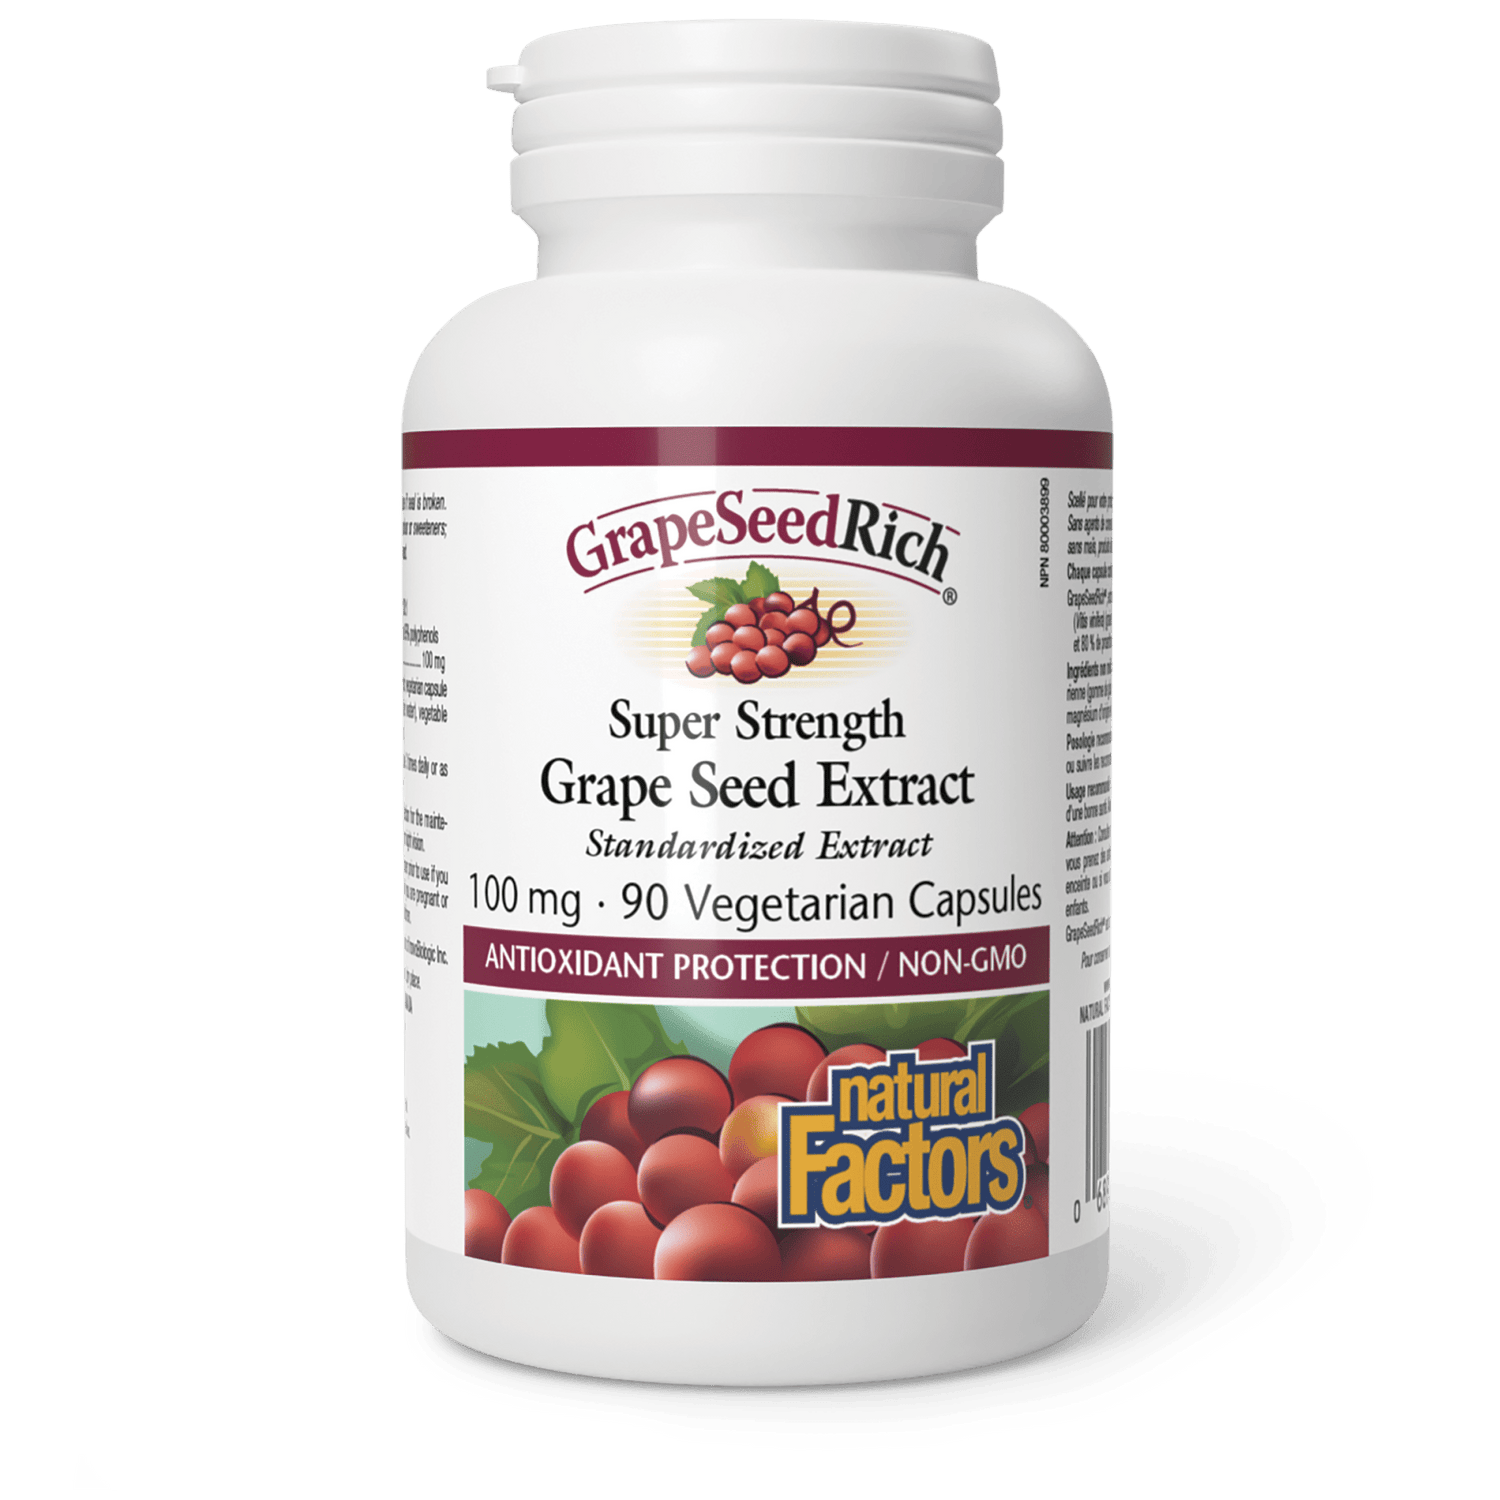 GrapeSeedRich Super Strength Grape Seed Extract 100 mg, Natural Factors|v|image|4536